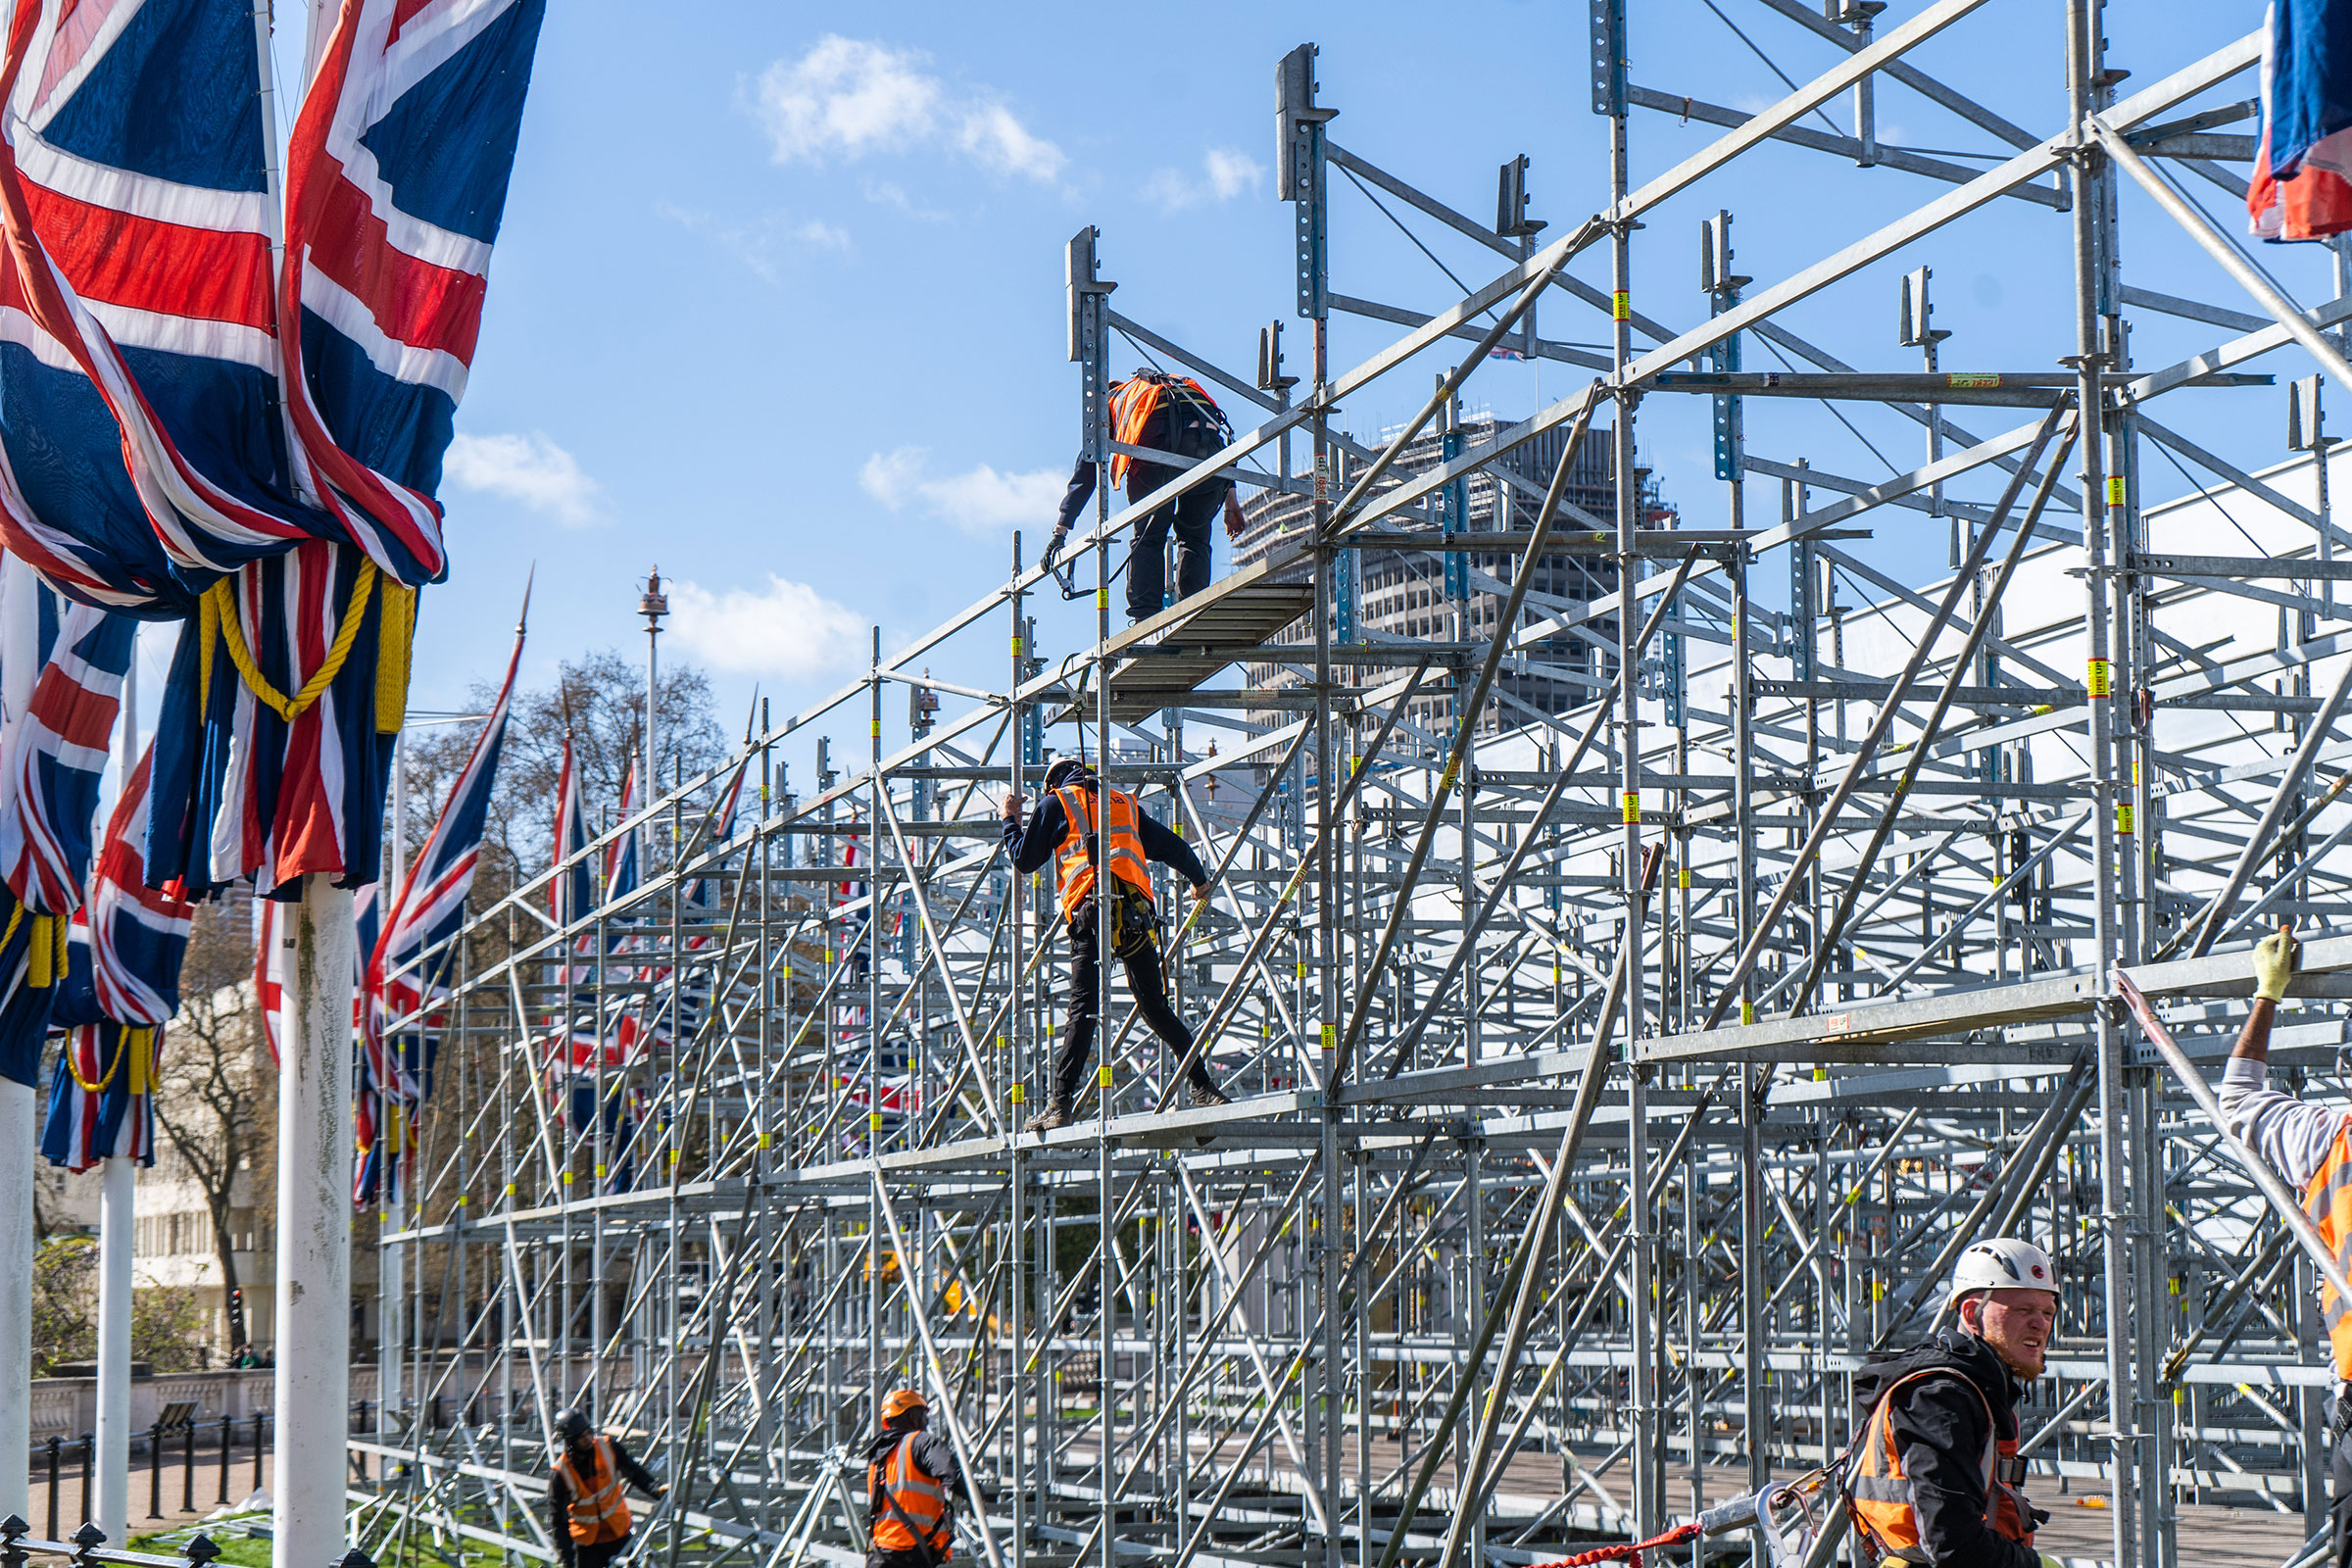 Workers build a viewing grandstand opposite Buckingham Palace on April 13. (Amer Ghazzal—Shutterstock)